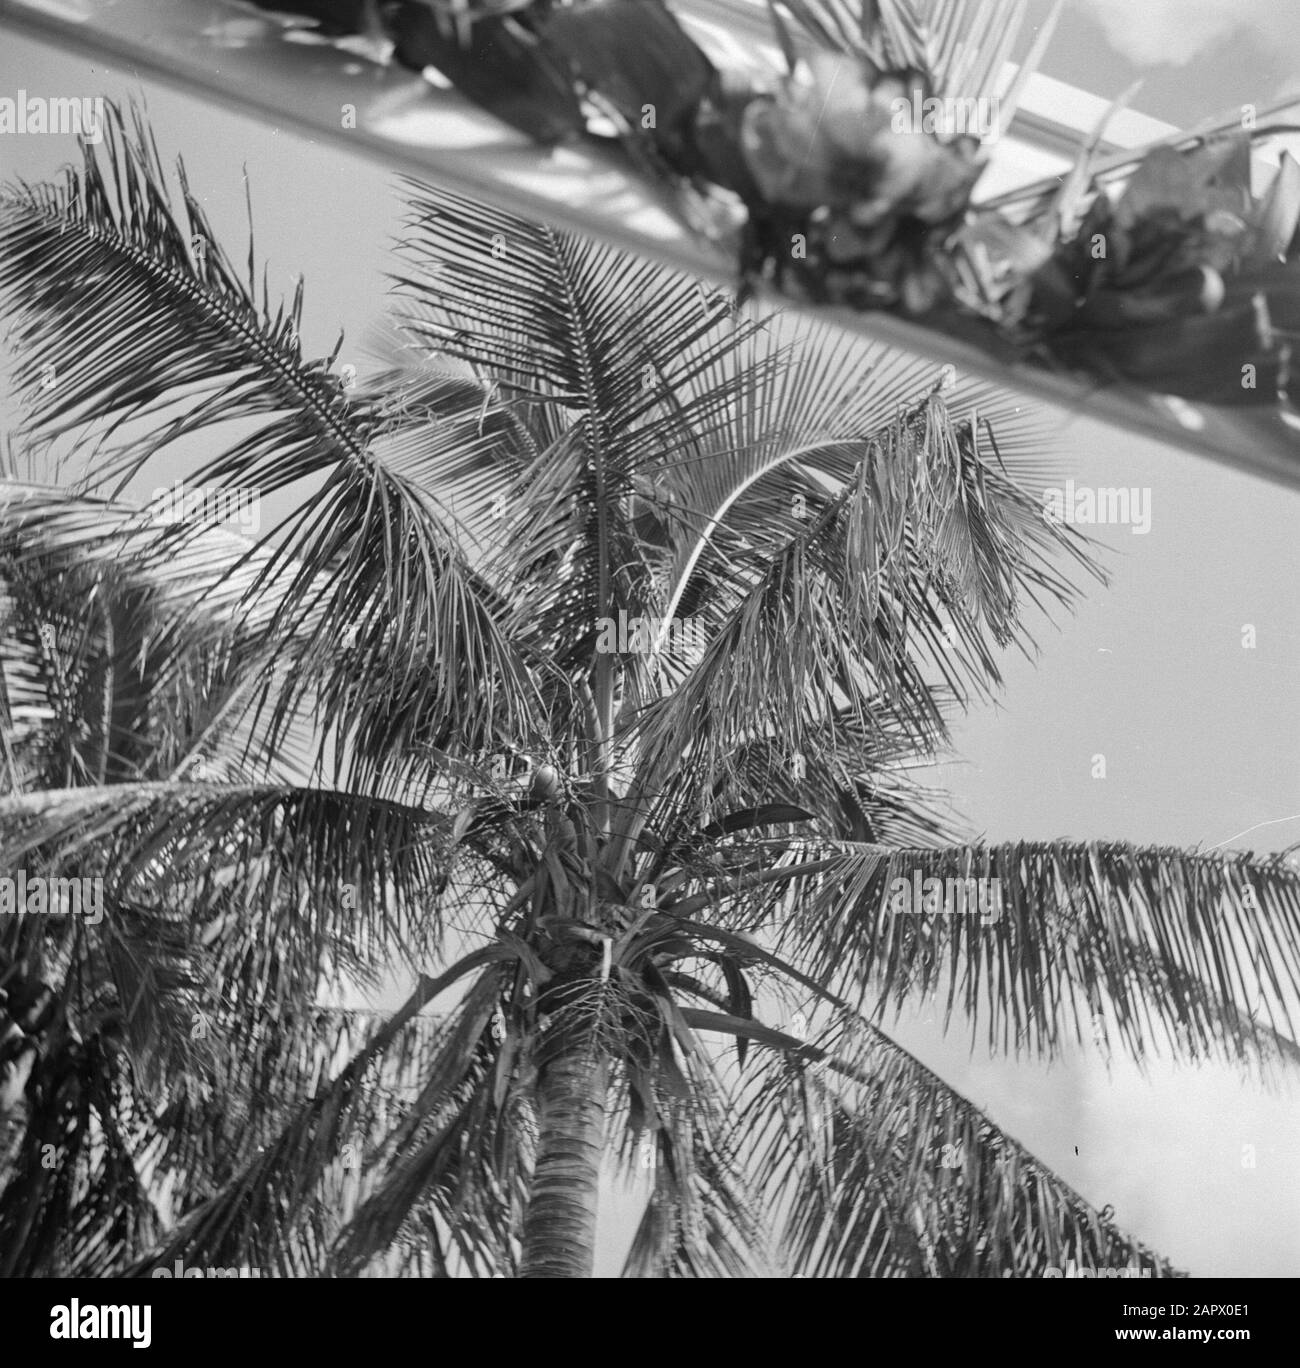 Dutch Antilles and Suriname at the time of the royal visit of Queen Juliana and Prince Bernhard in 1955  Palm trees Date: October 1955 Location: Dutch Antilles Keywords: palms Stock Photo